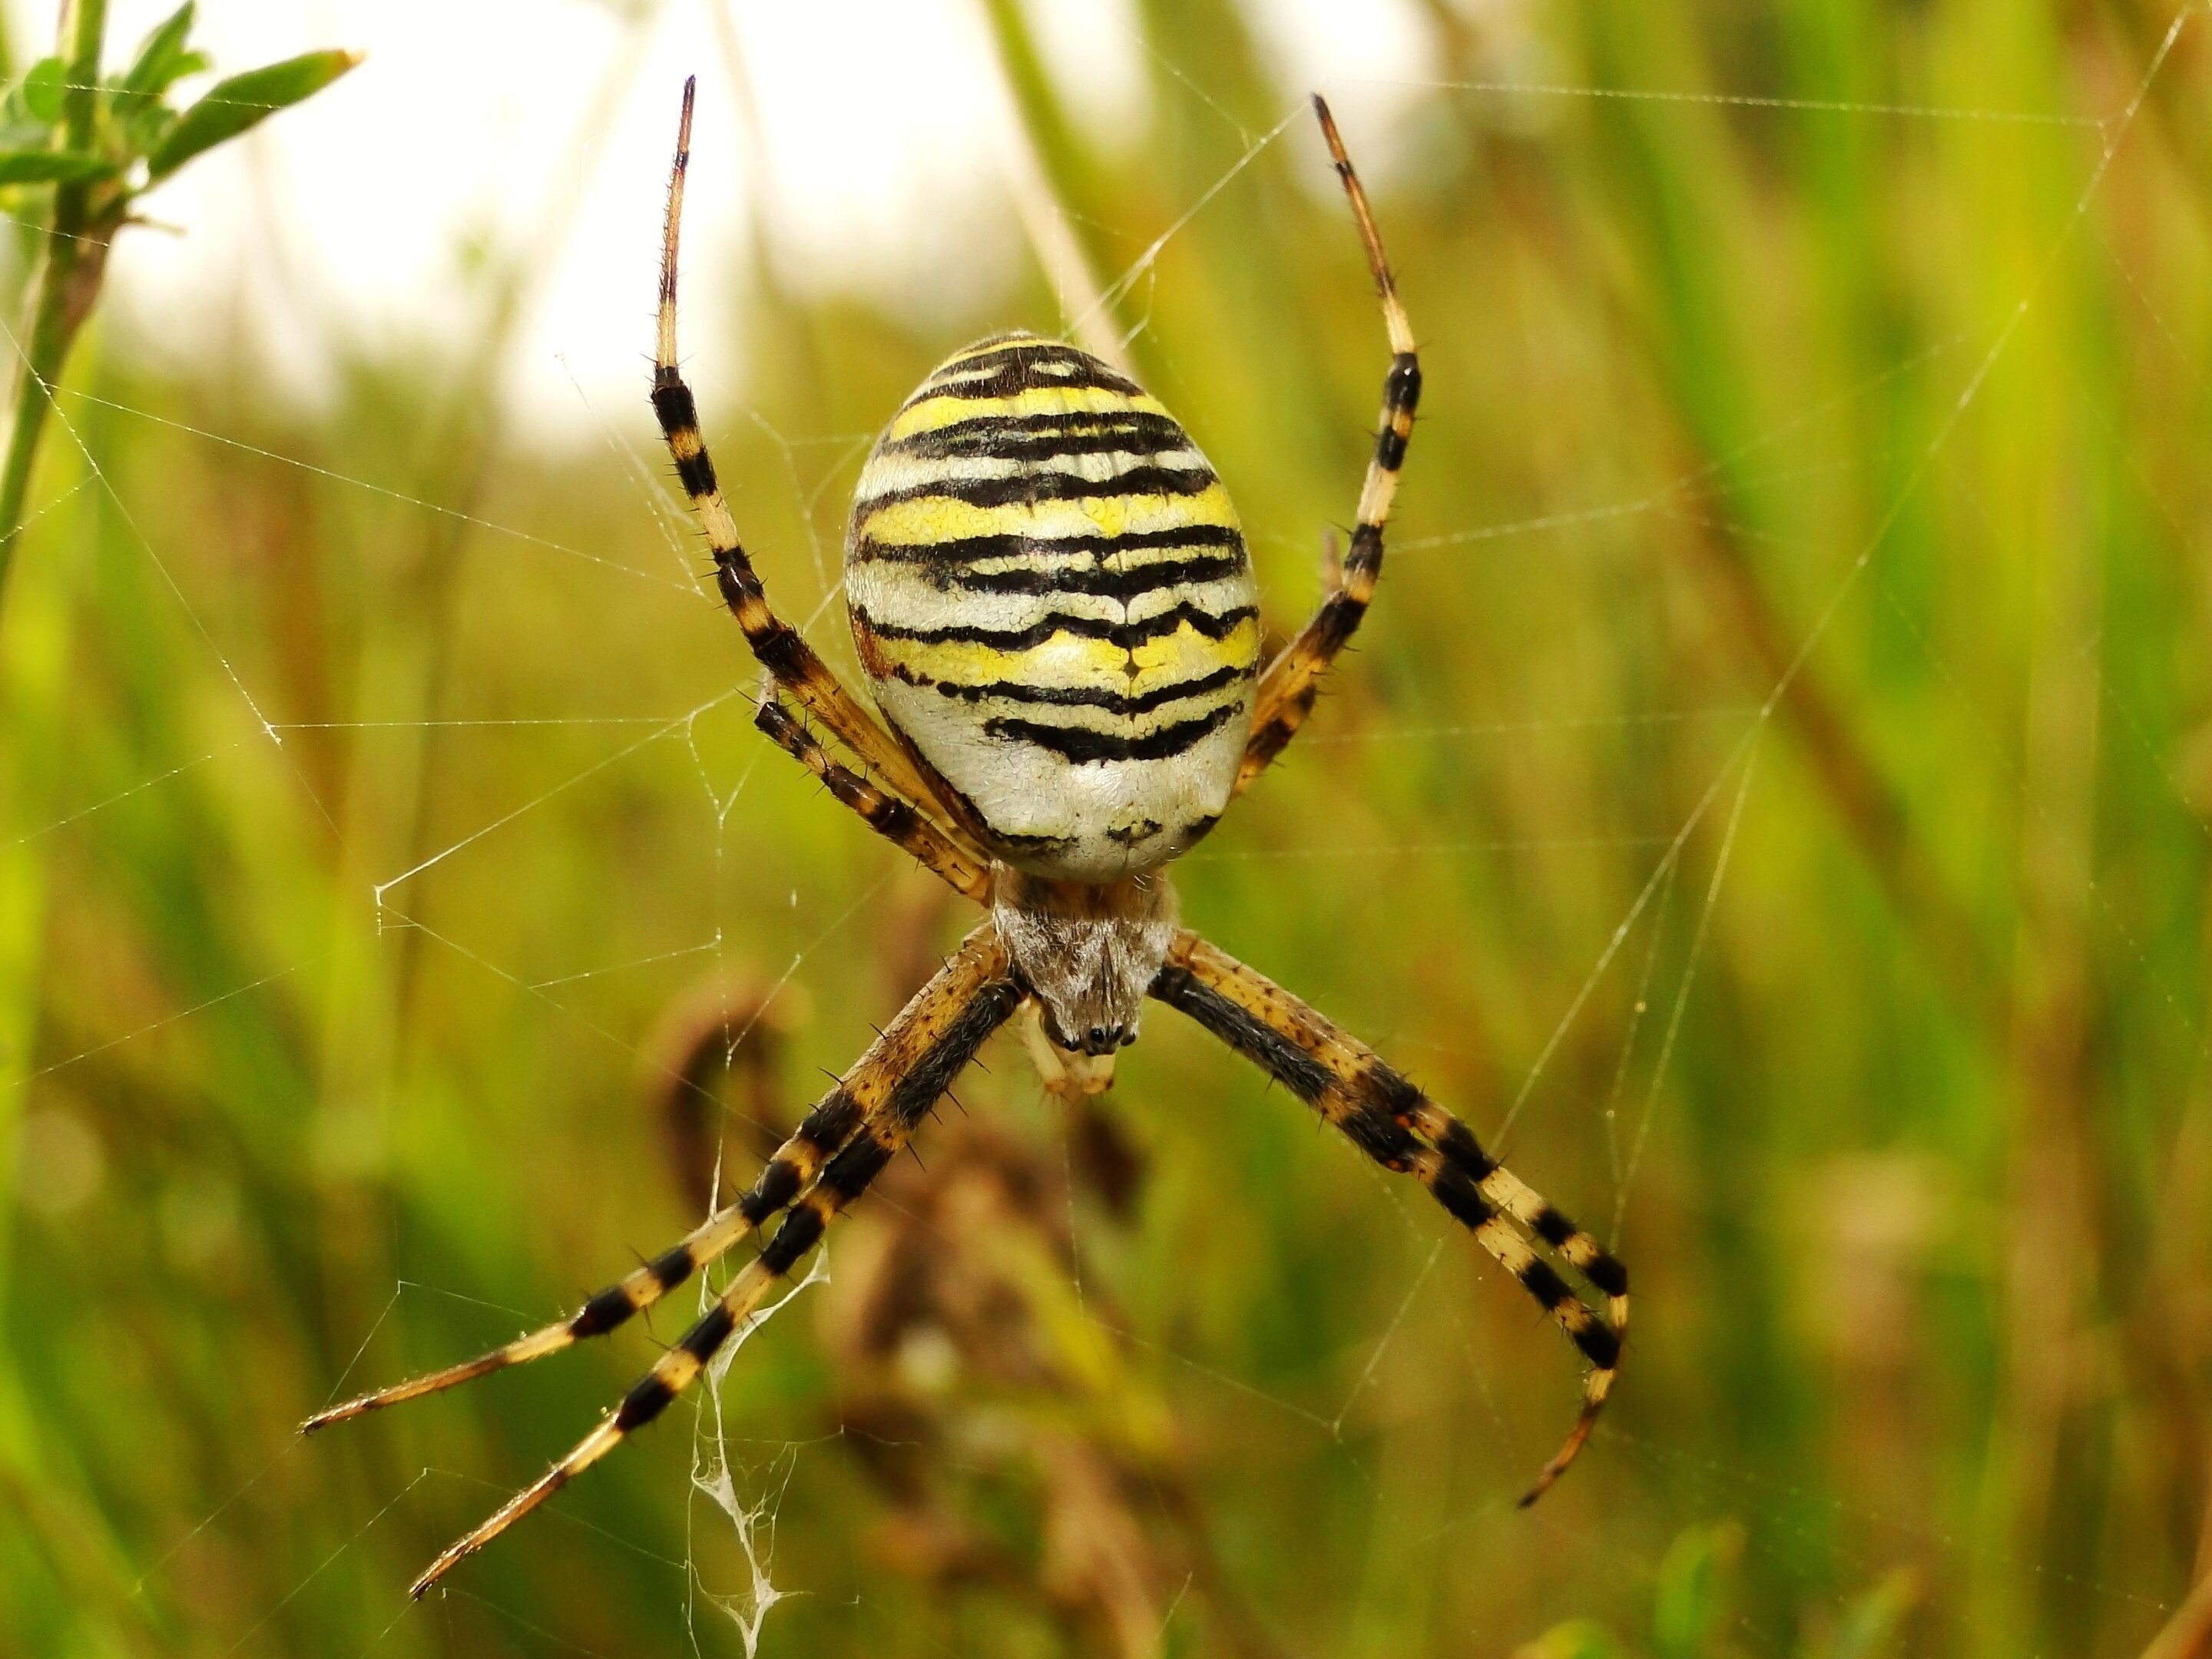 Spiders use prestressed silk to take prey off the ground